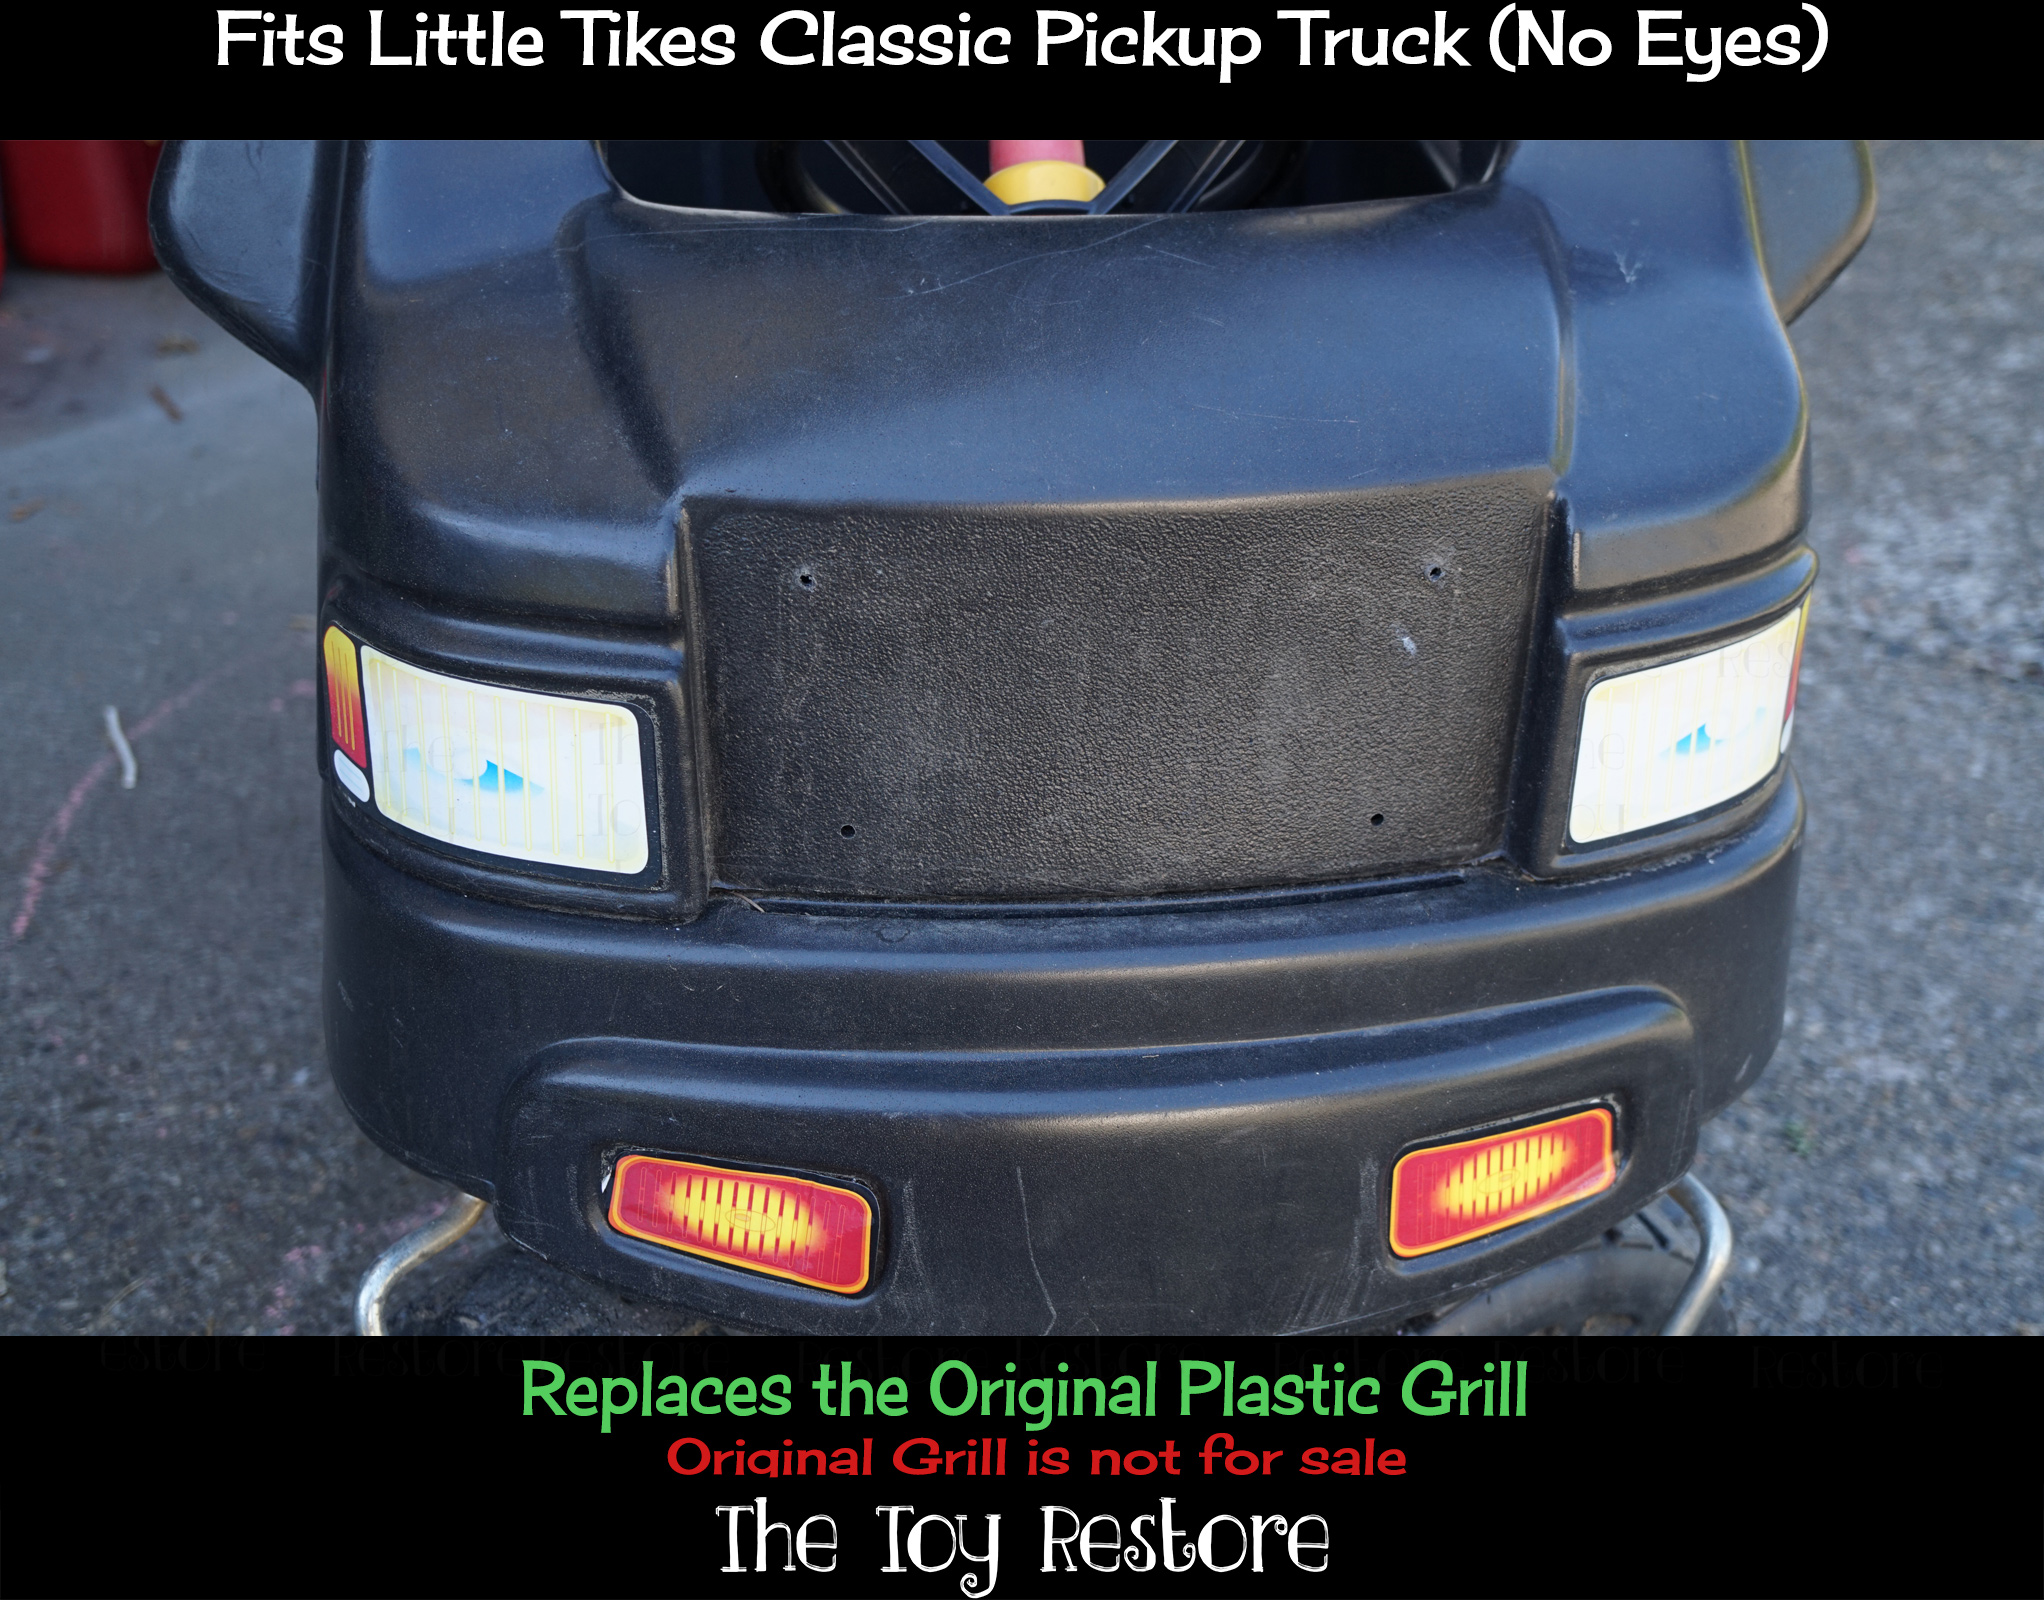 00001-blog-truck-no-eyes-grill-replacement-blank-front